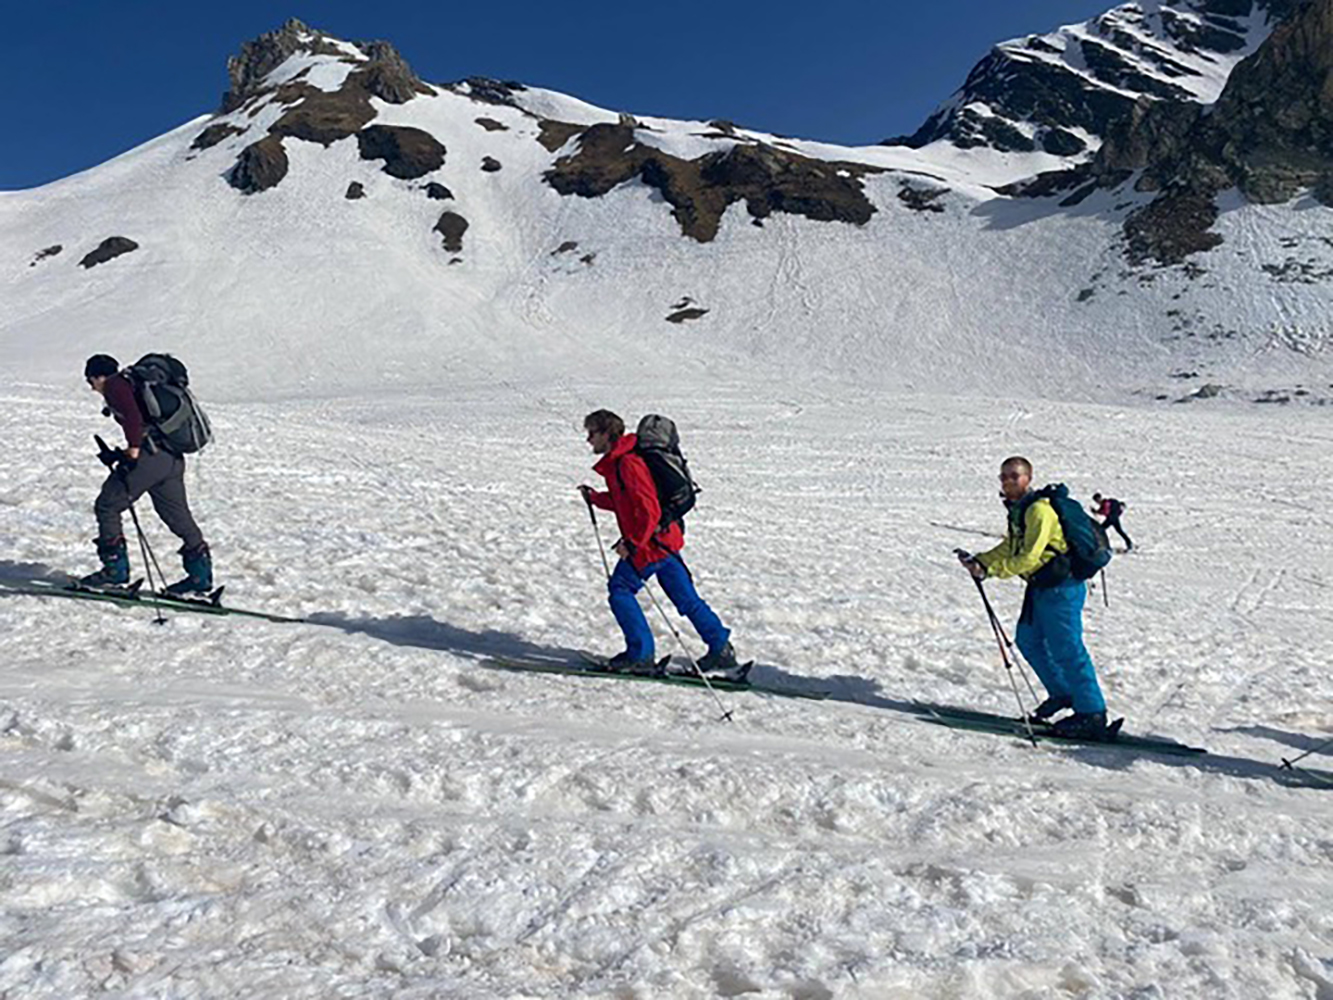 altitude medicine includes ski touring expedition with Endeavour Medical team